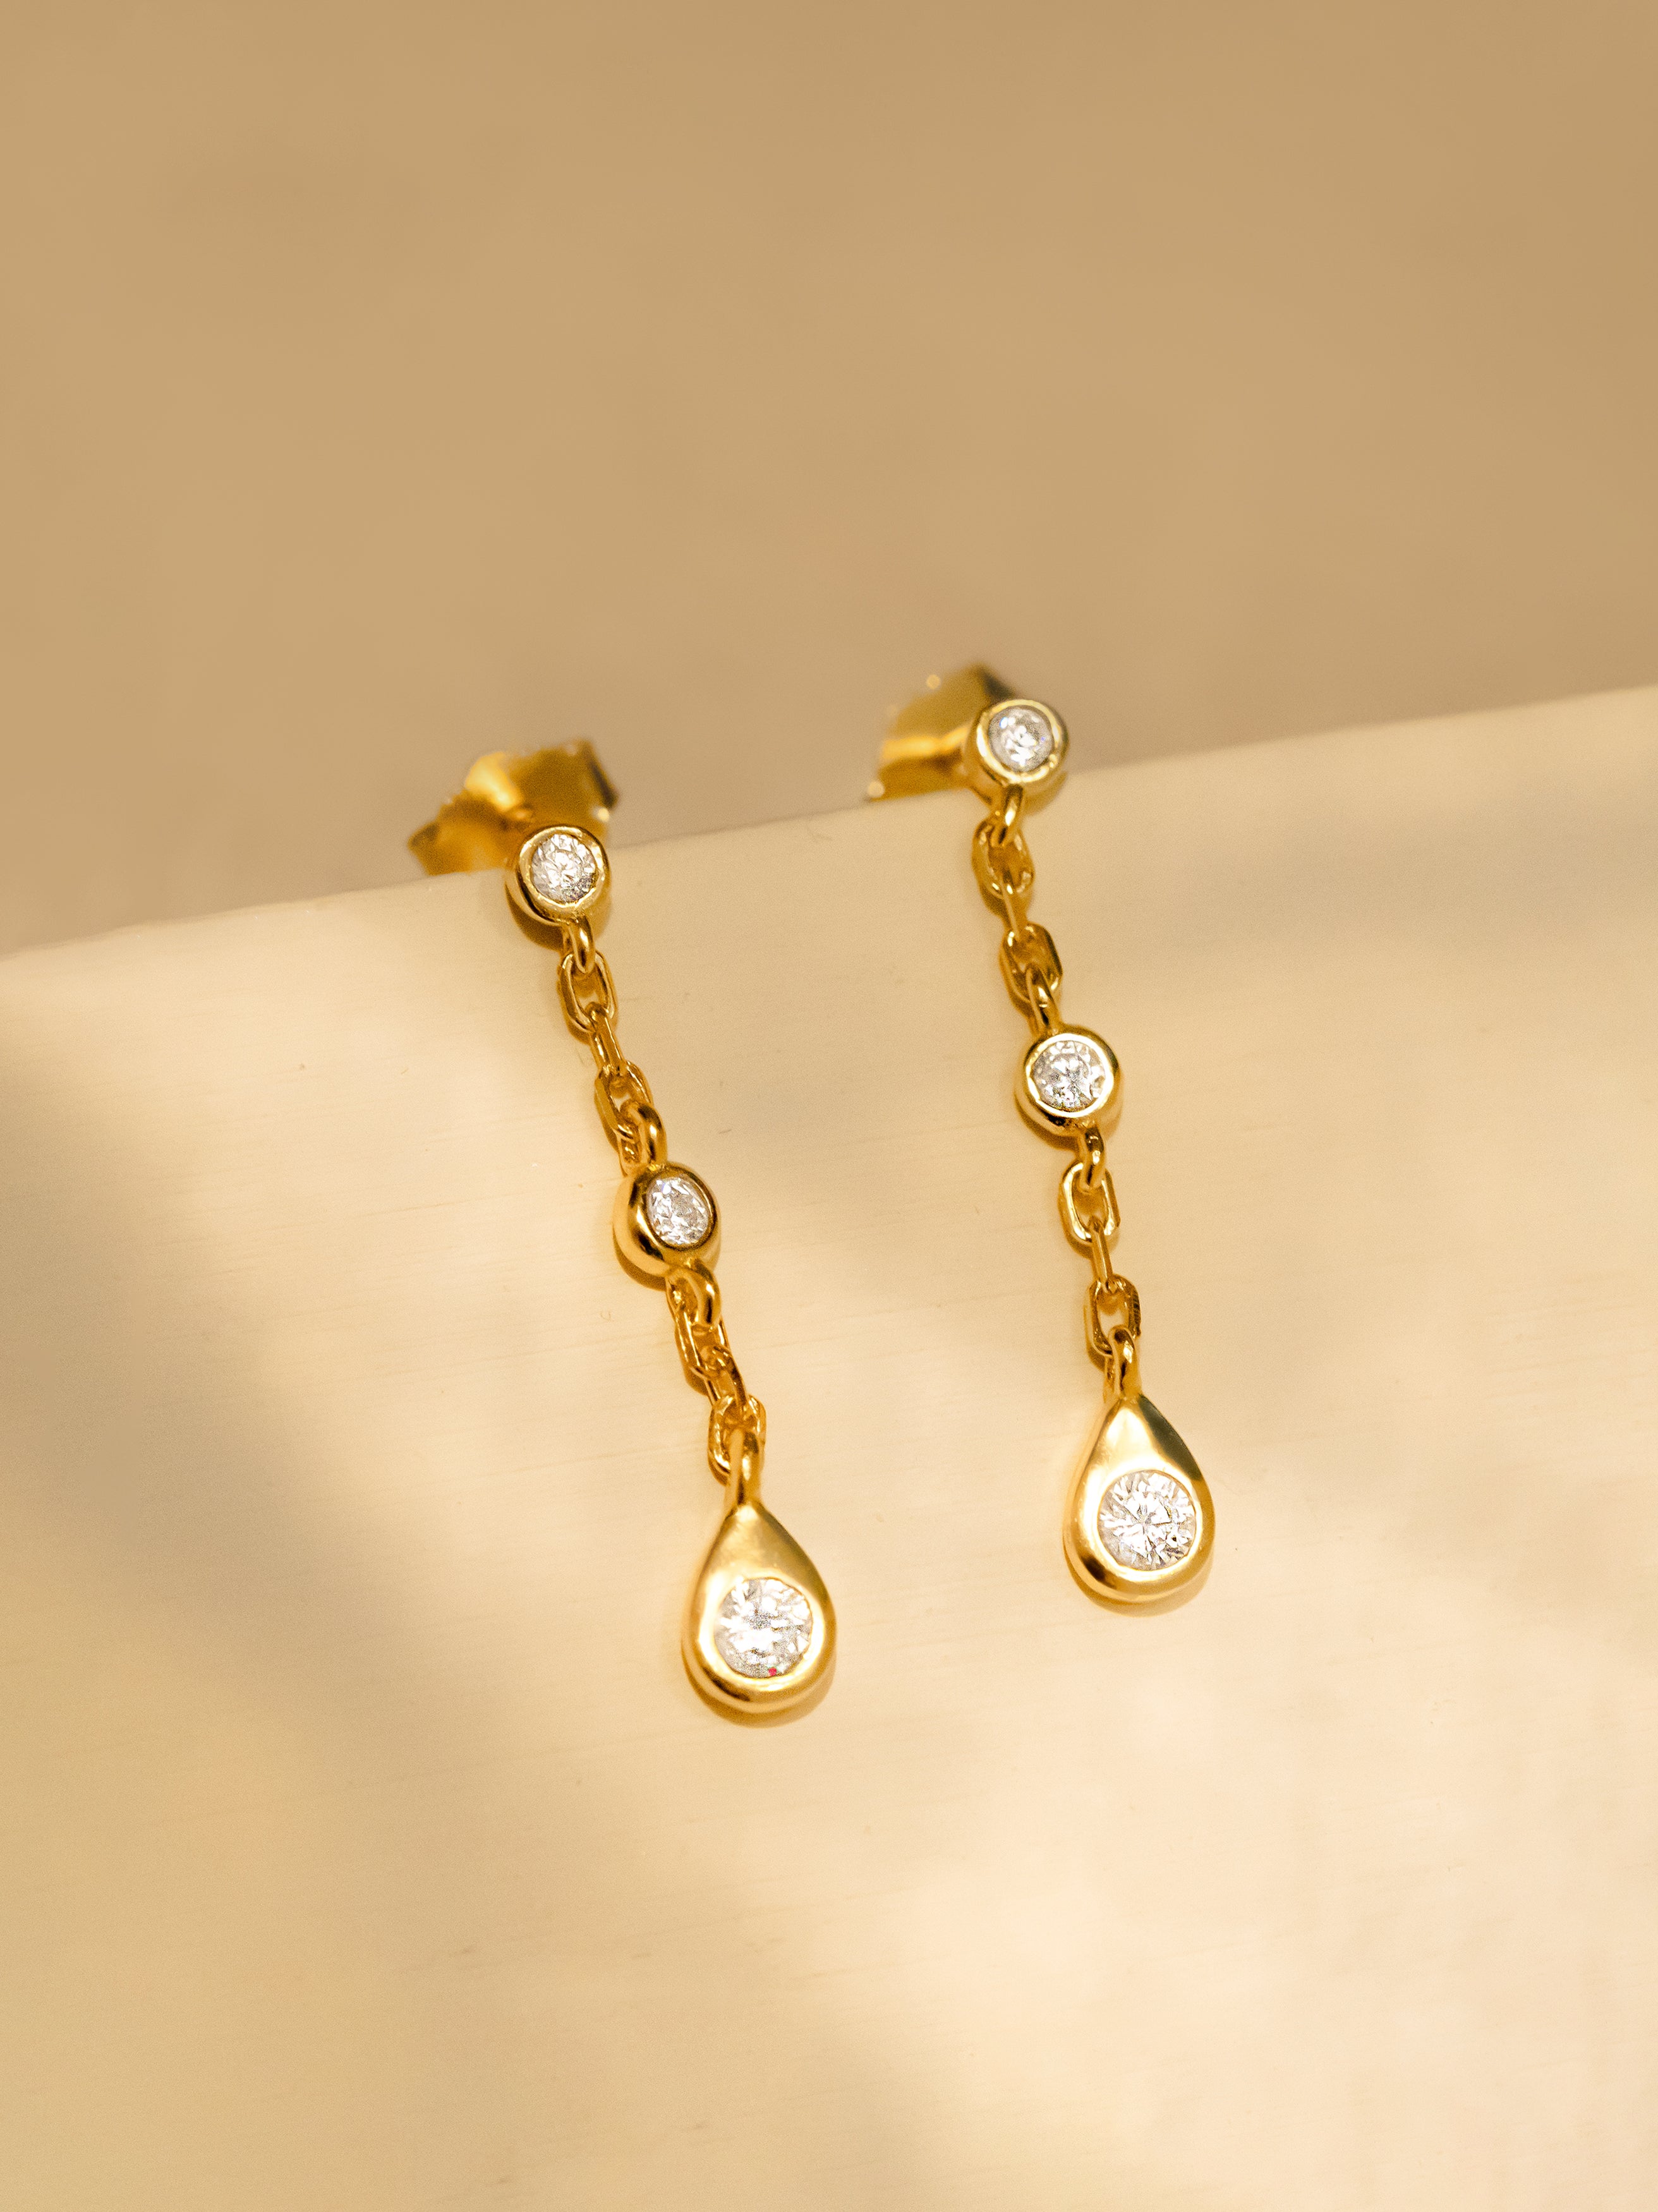 Gold Dangle Chain Earrings With White Stones